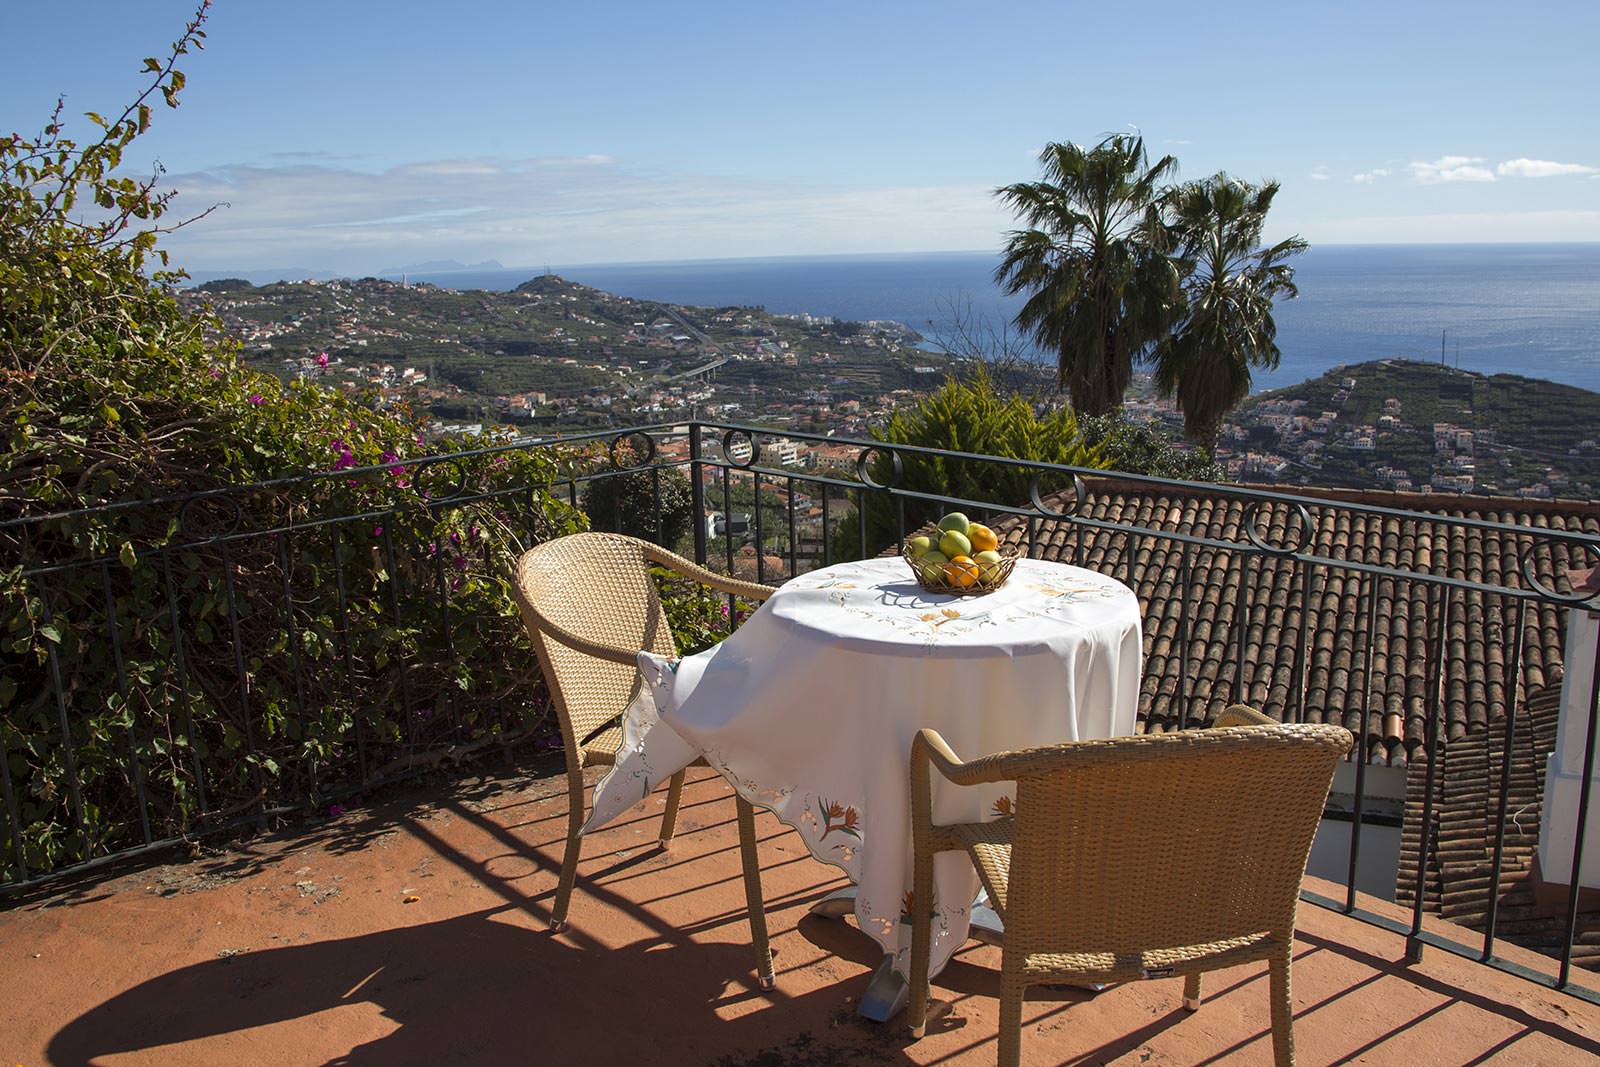 Breakfast with style at Villa Afonso